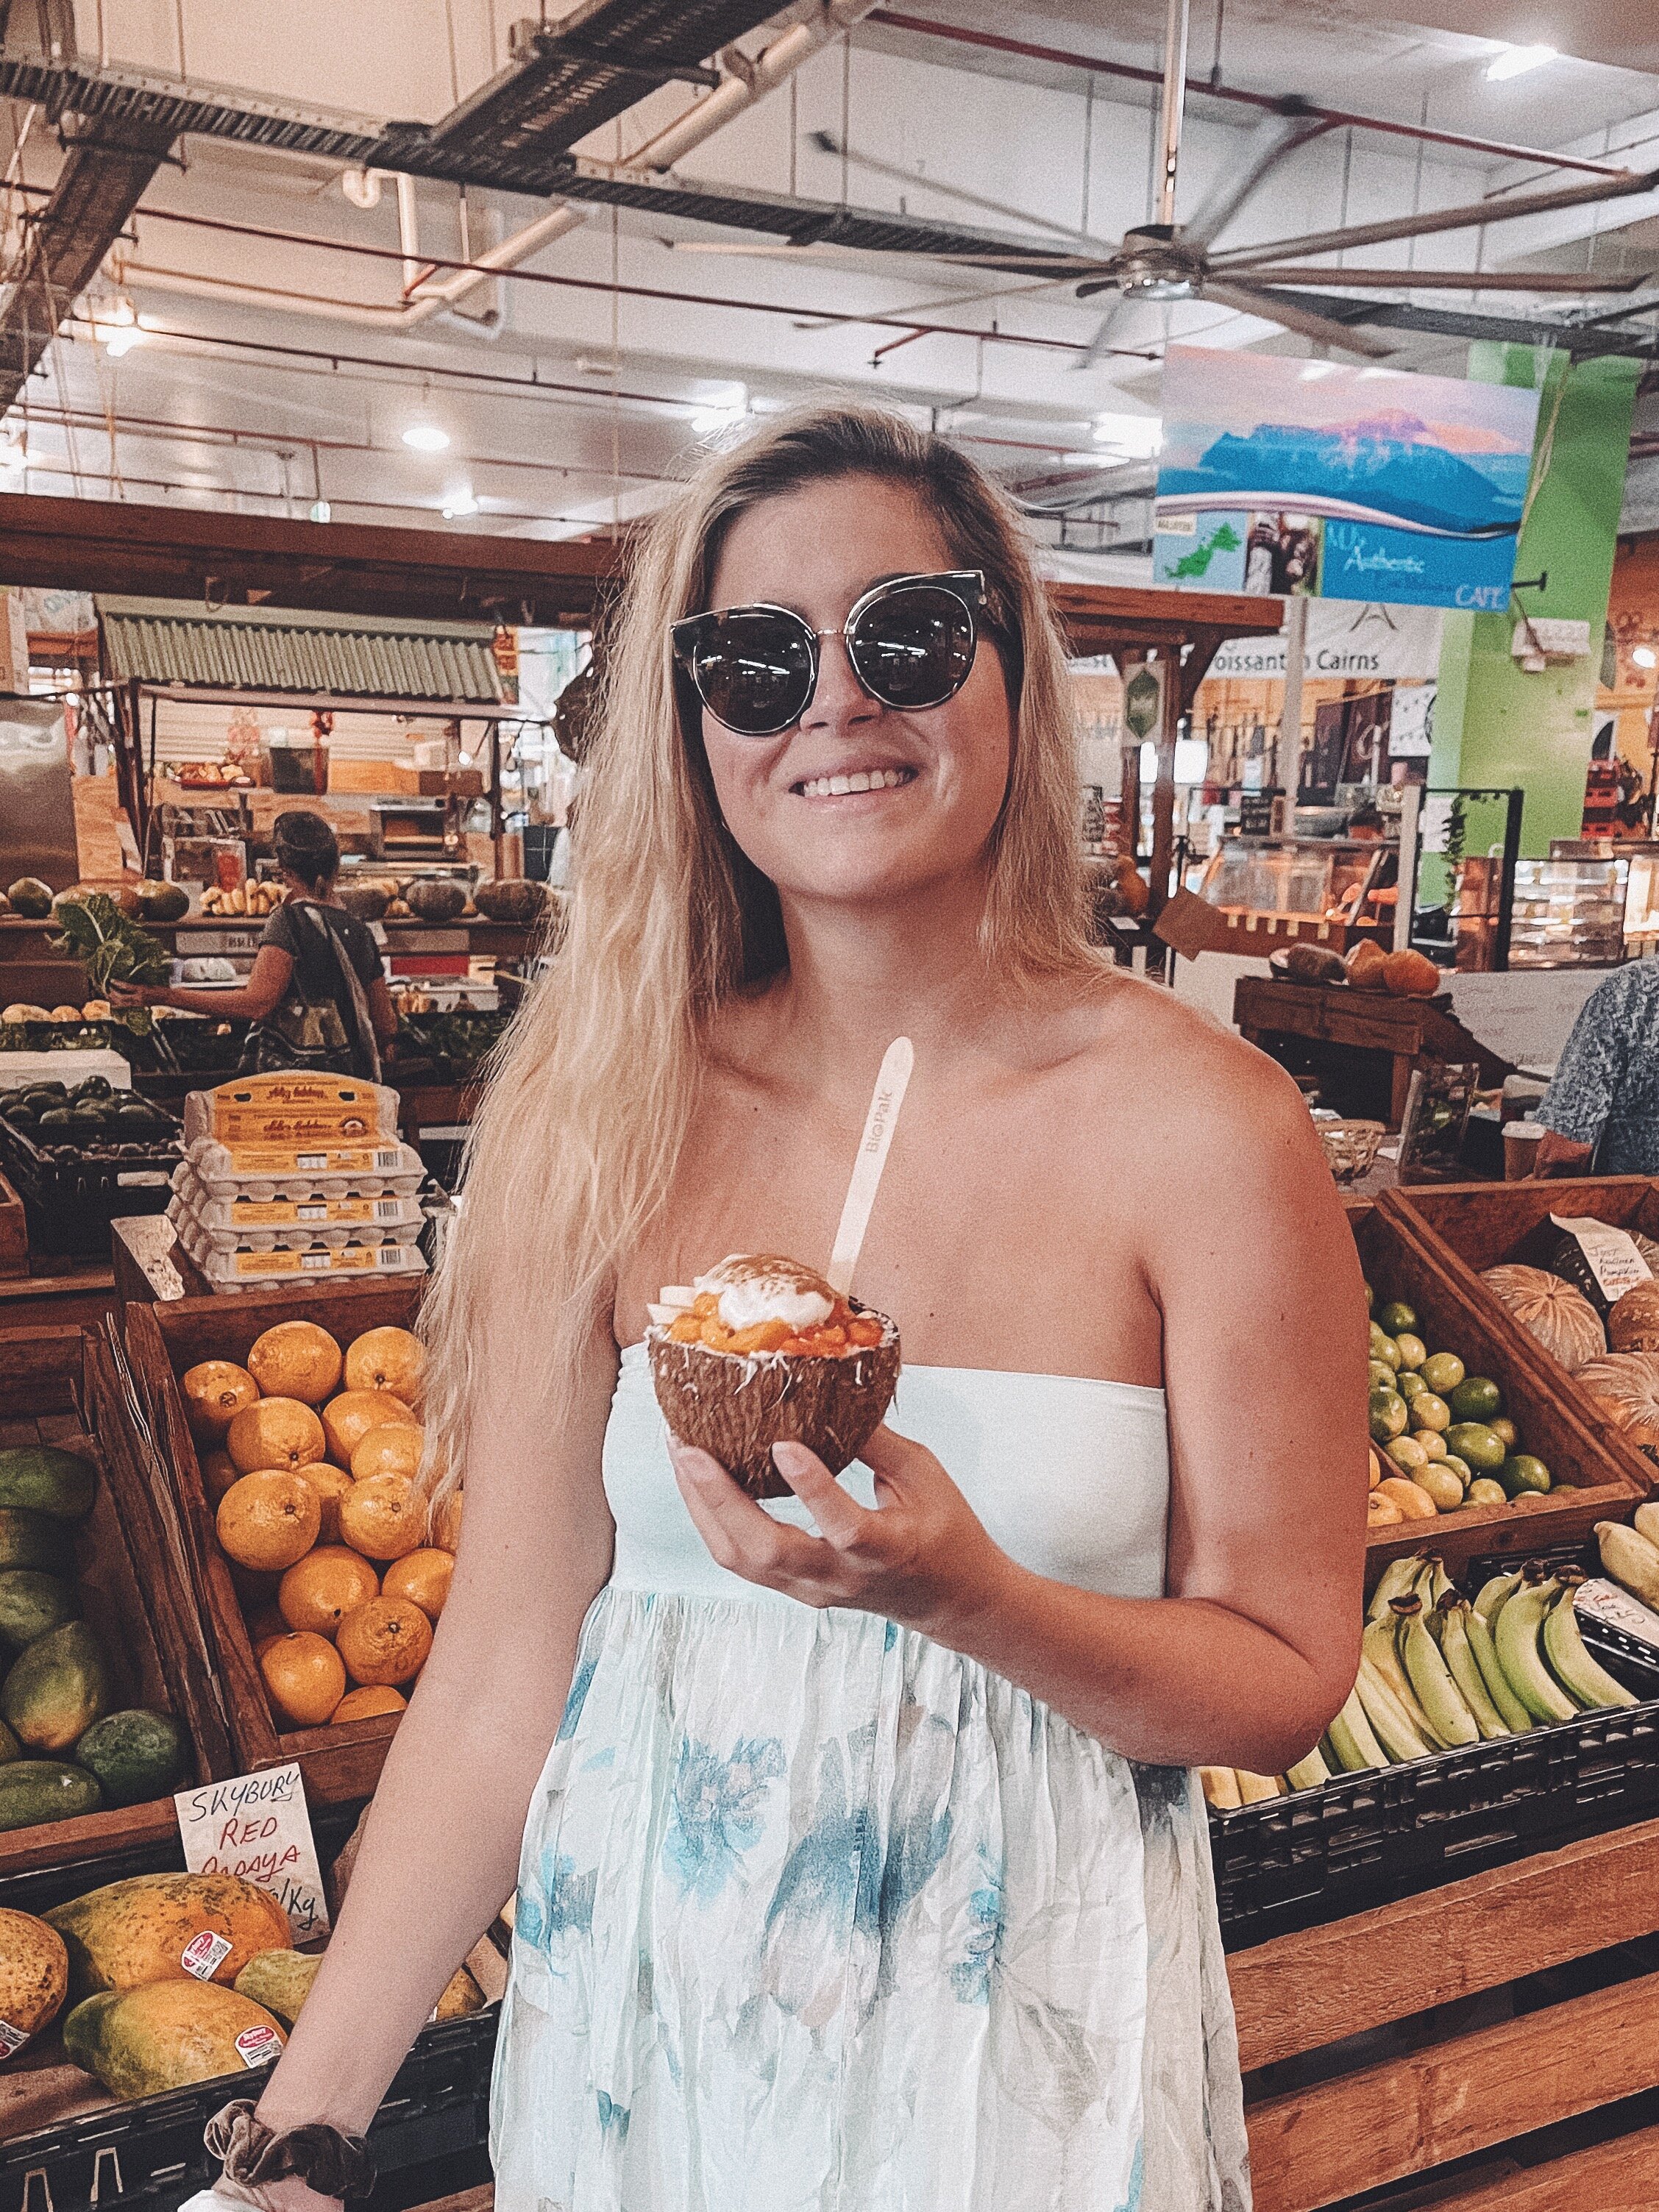 About to devour that delicious fruit bowl at Rusty's Market - Cairns - Tropical North Queensland (QLD) - Australia